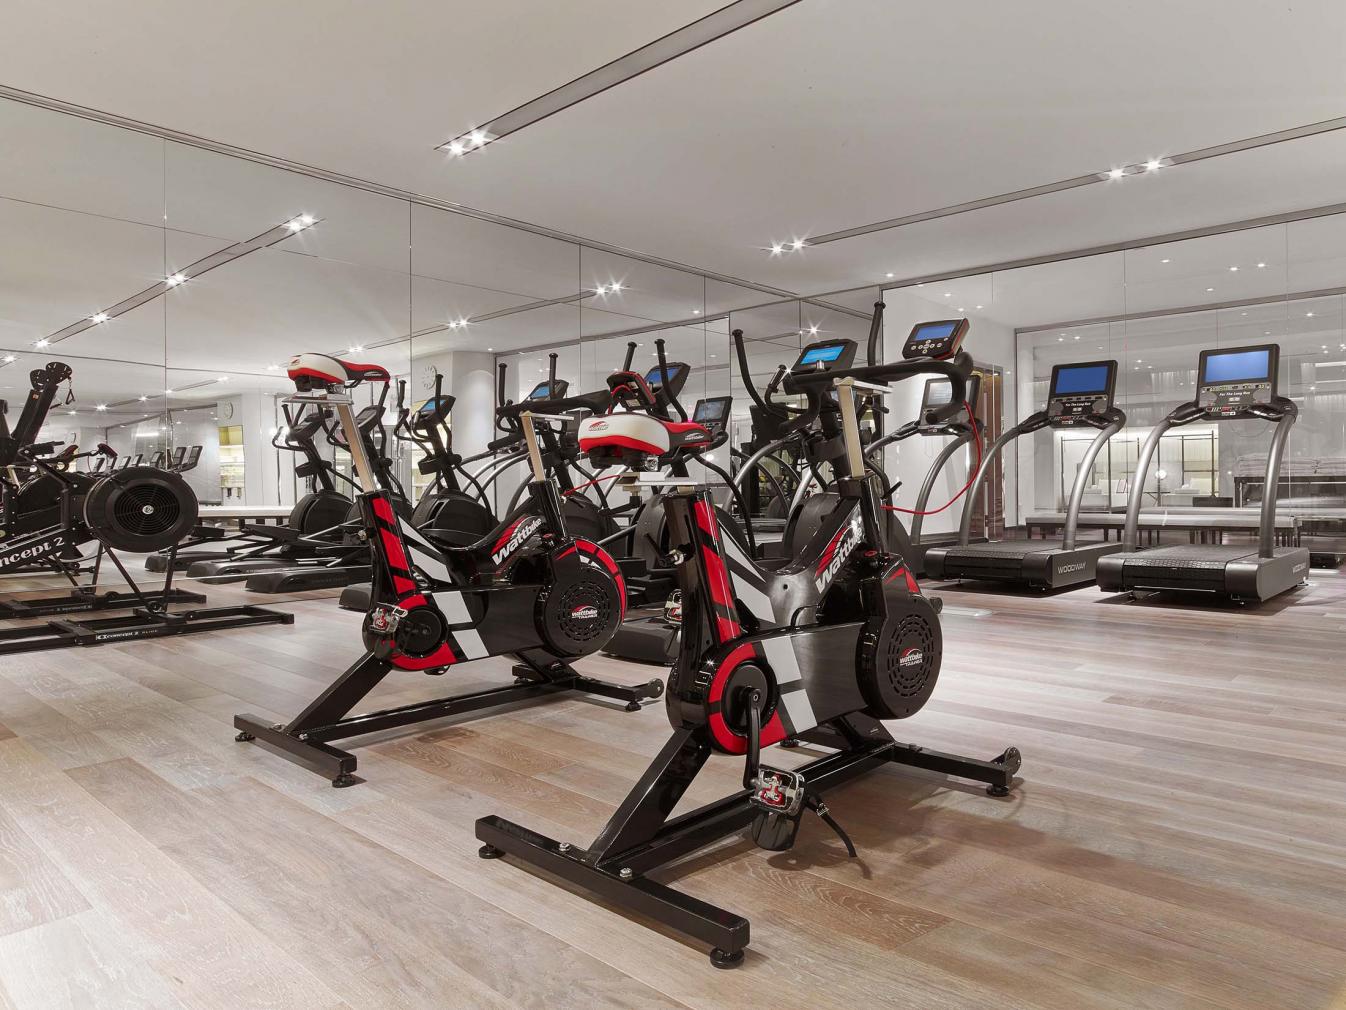 Elliptical machines in the fitness room at Baccarat hotel